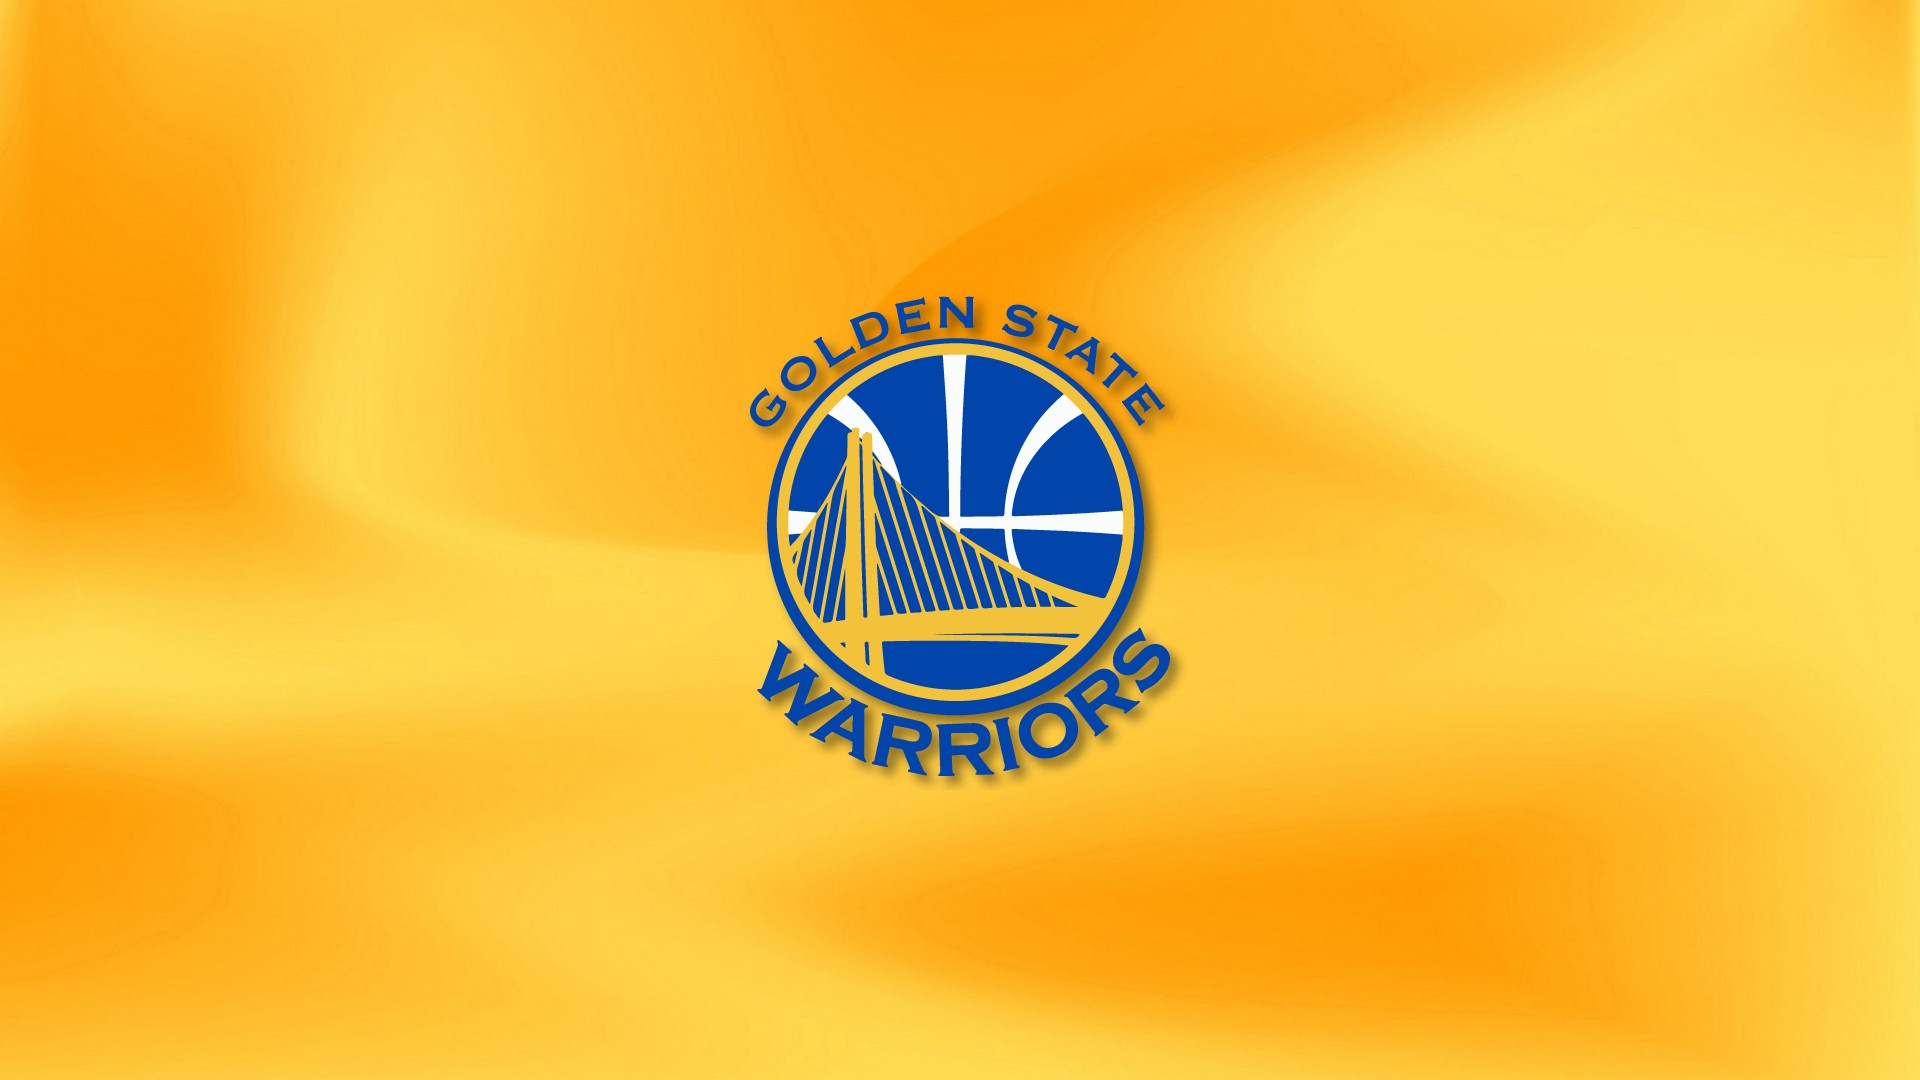 HD Golden State Warriors Backgrounds with image resolution 1920x1080 pixel. You can use this wallpaper as background for your desktop Computer Screensavers, Android or iPhone smartphones